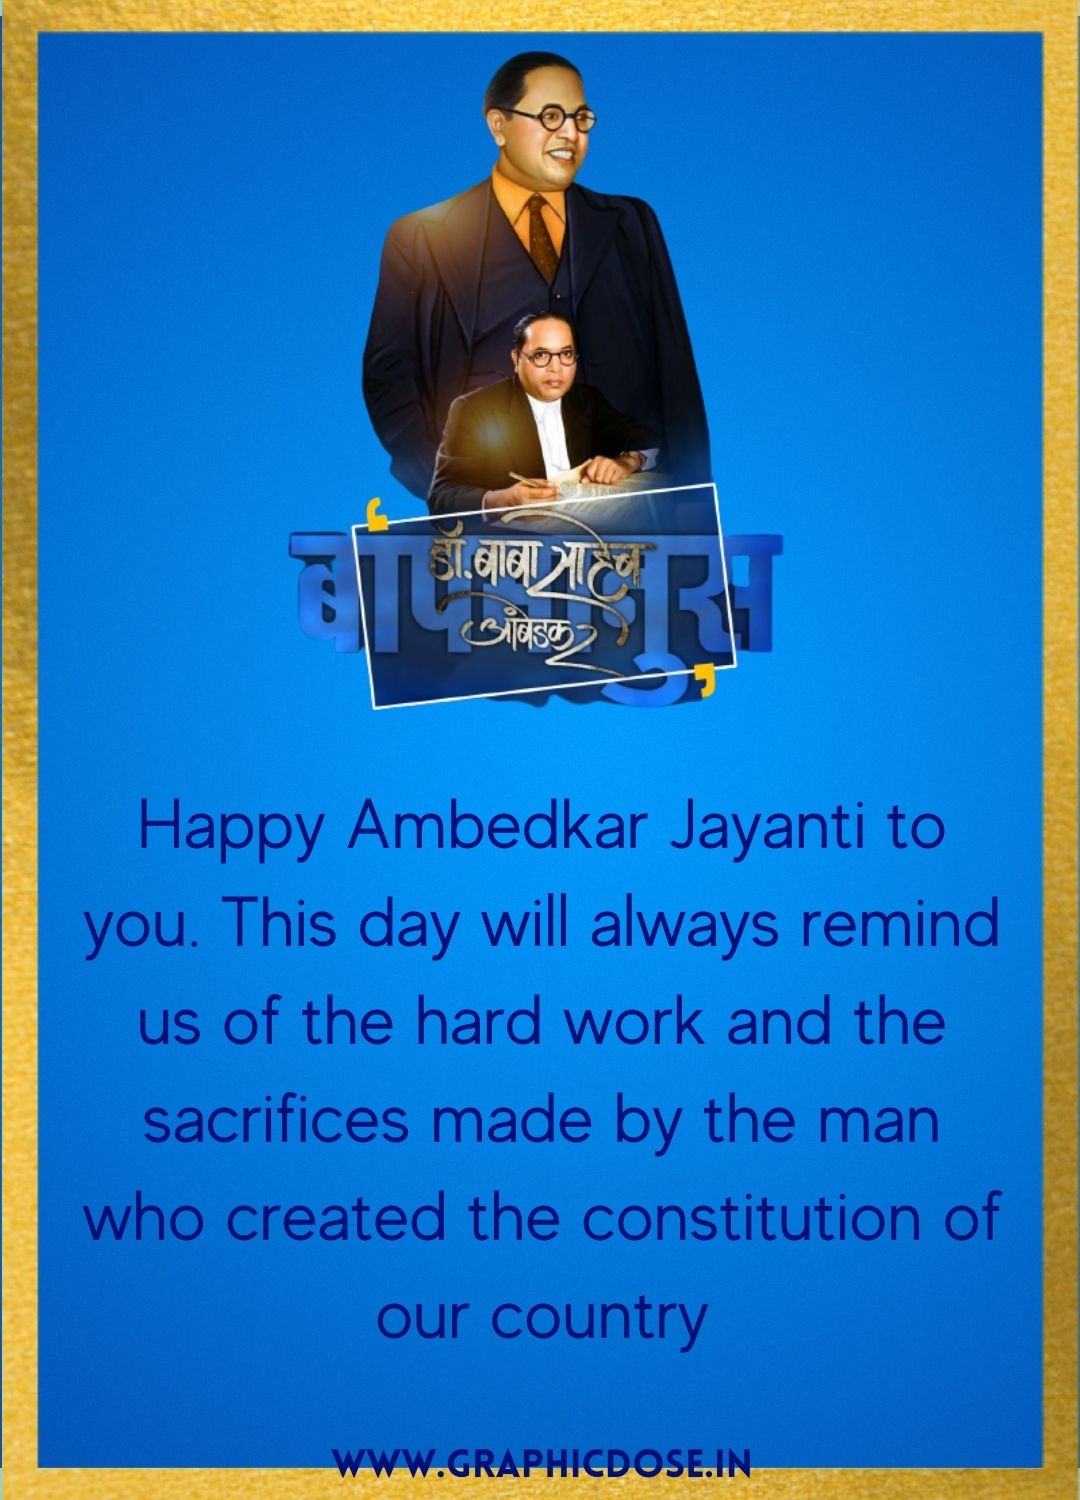 babasaheb ambedkar images with quotes
